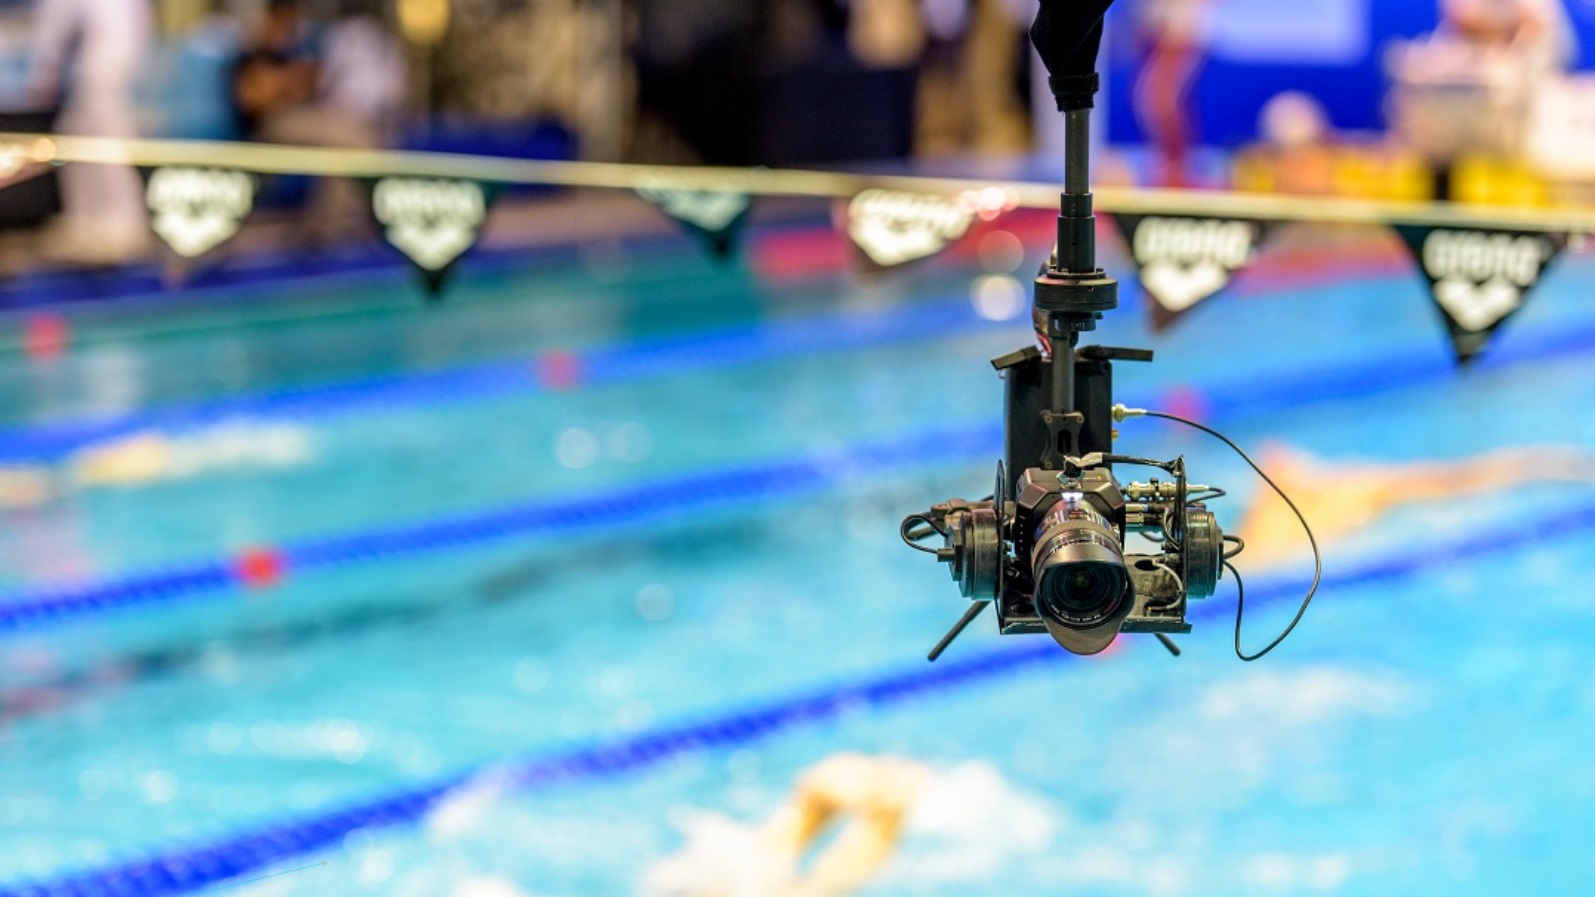 DynamiCam’s aerial camera system above the pool for the European Swimming League Championships at Israel’s Wingate Institute. Photo: courtesy